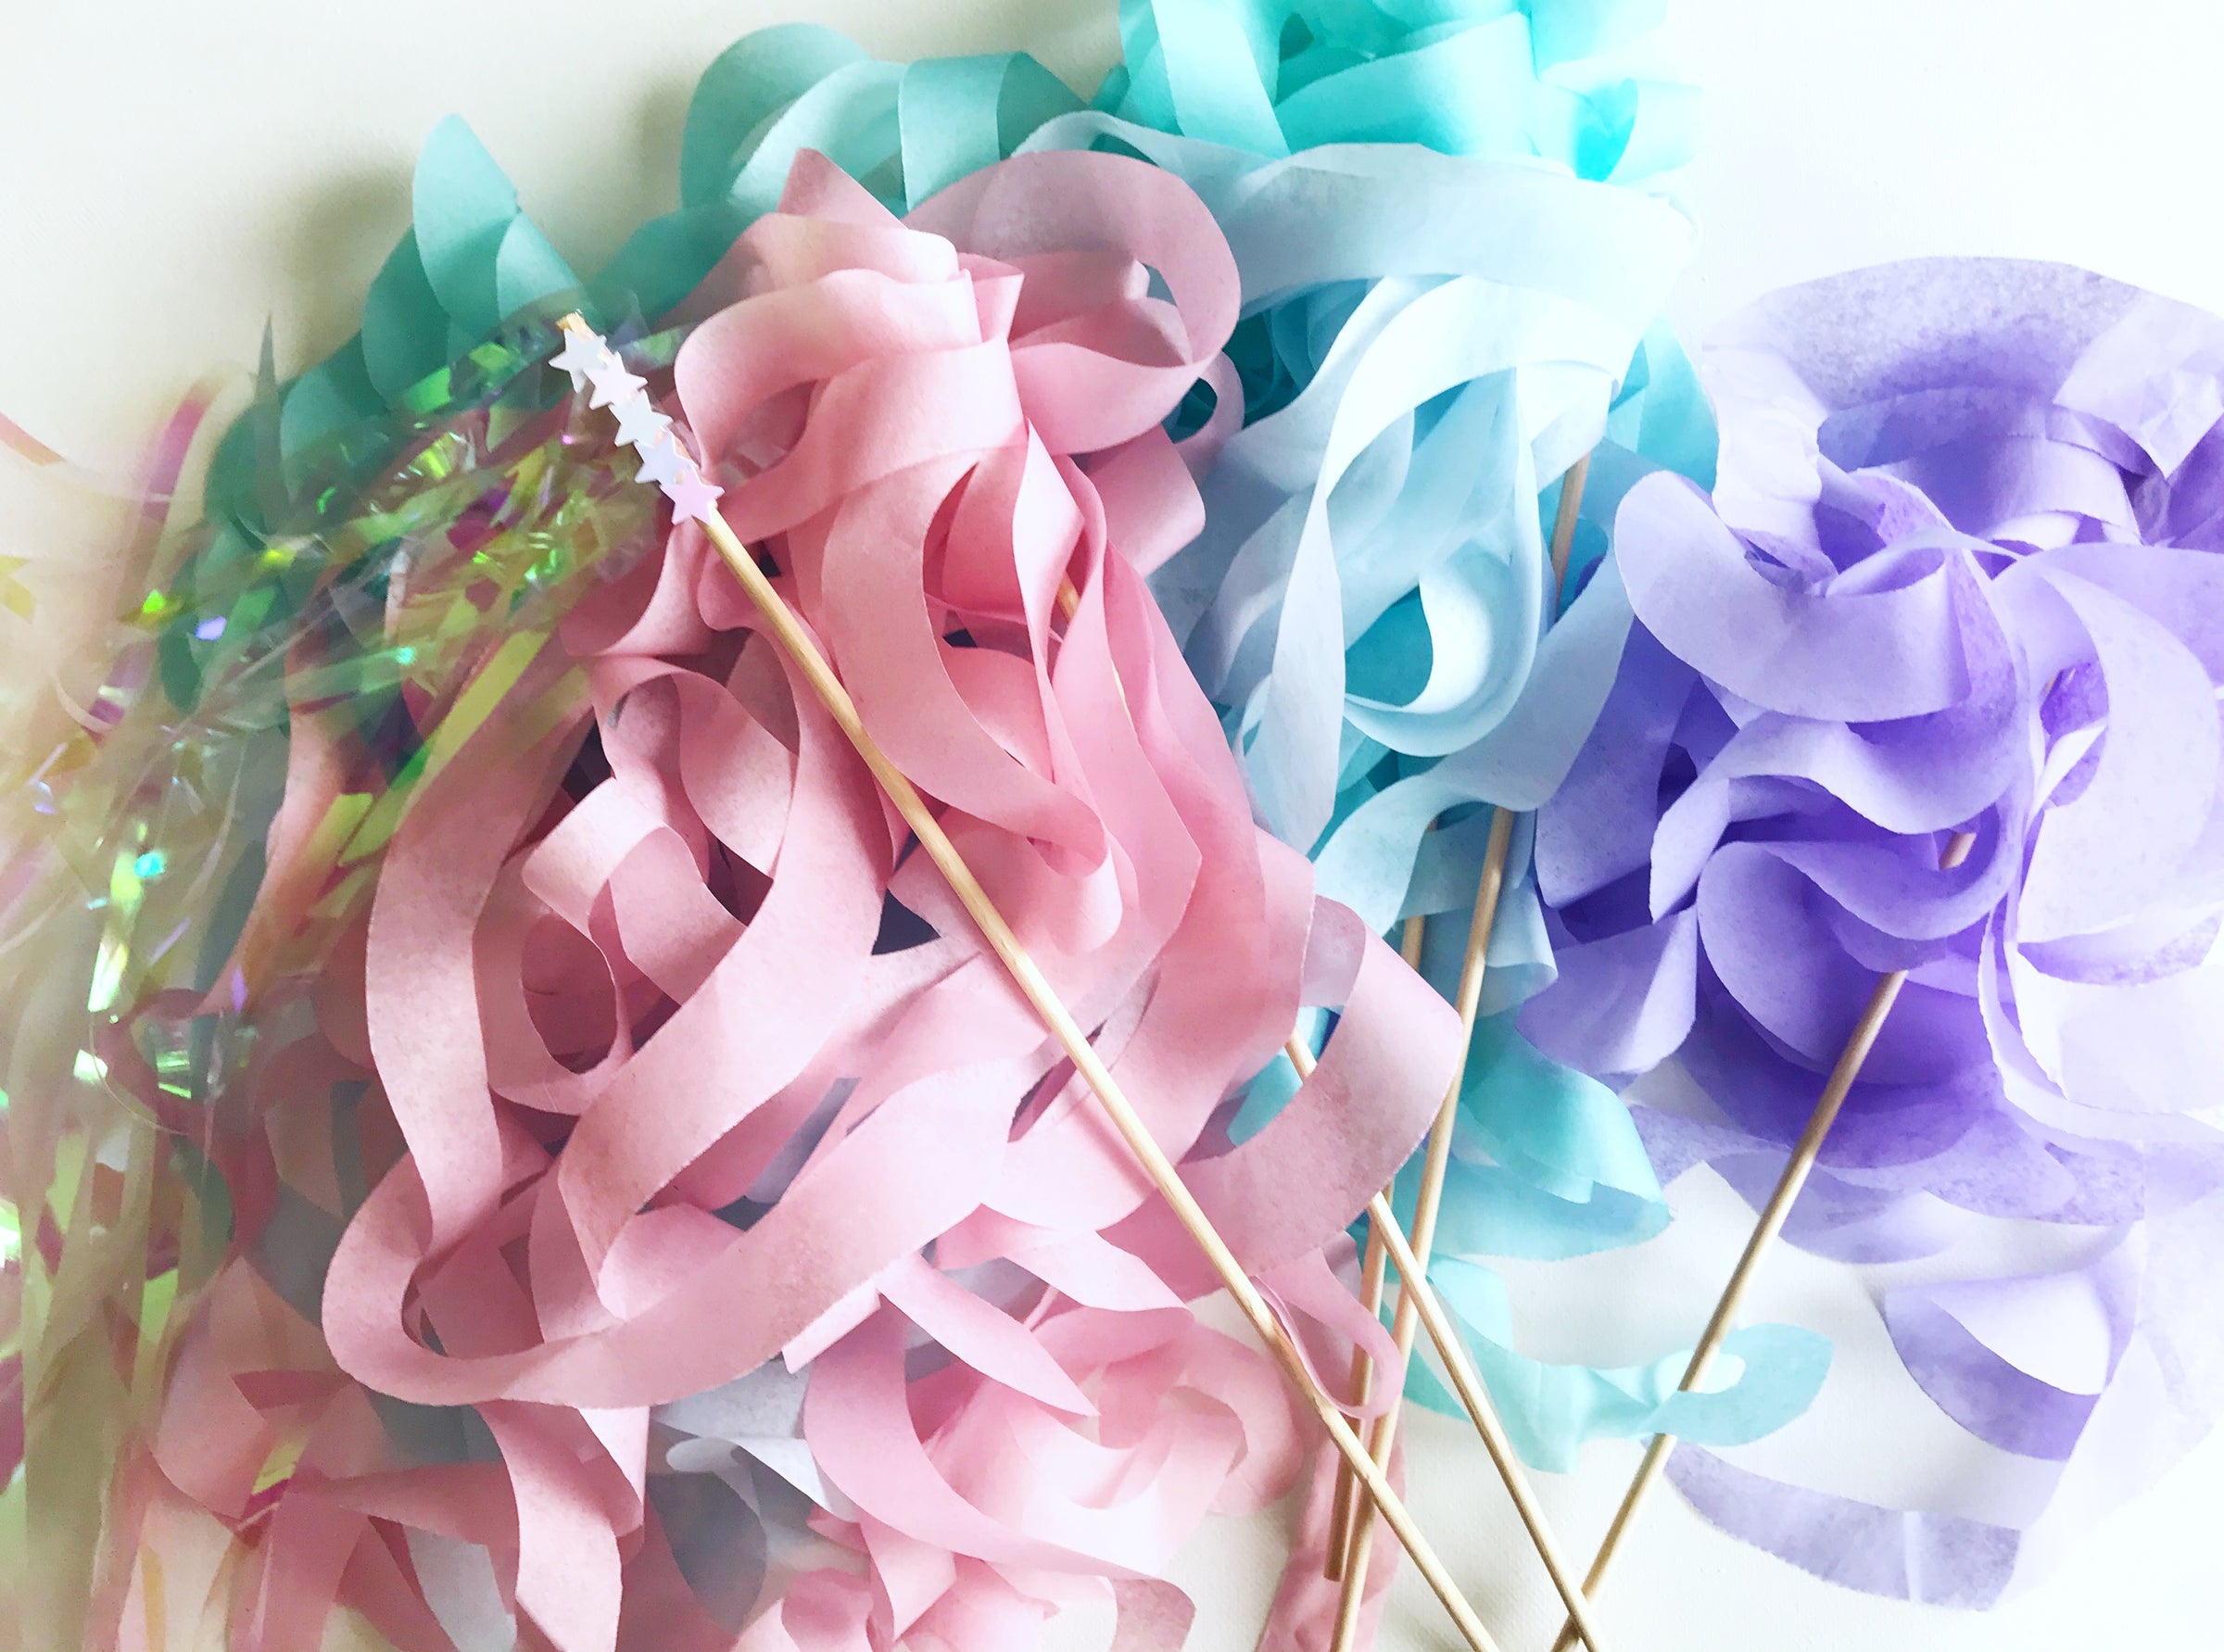 Pink & Gold Crepe Paper Streamers Birthday Decorations -  Portugal